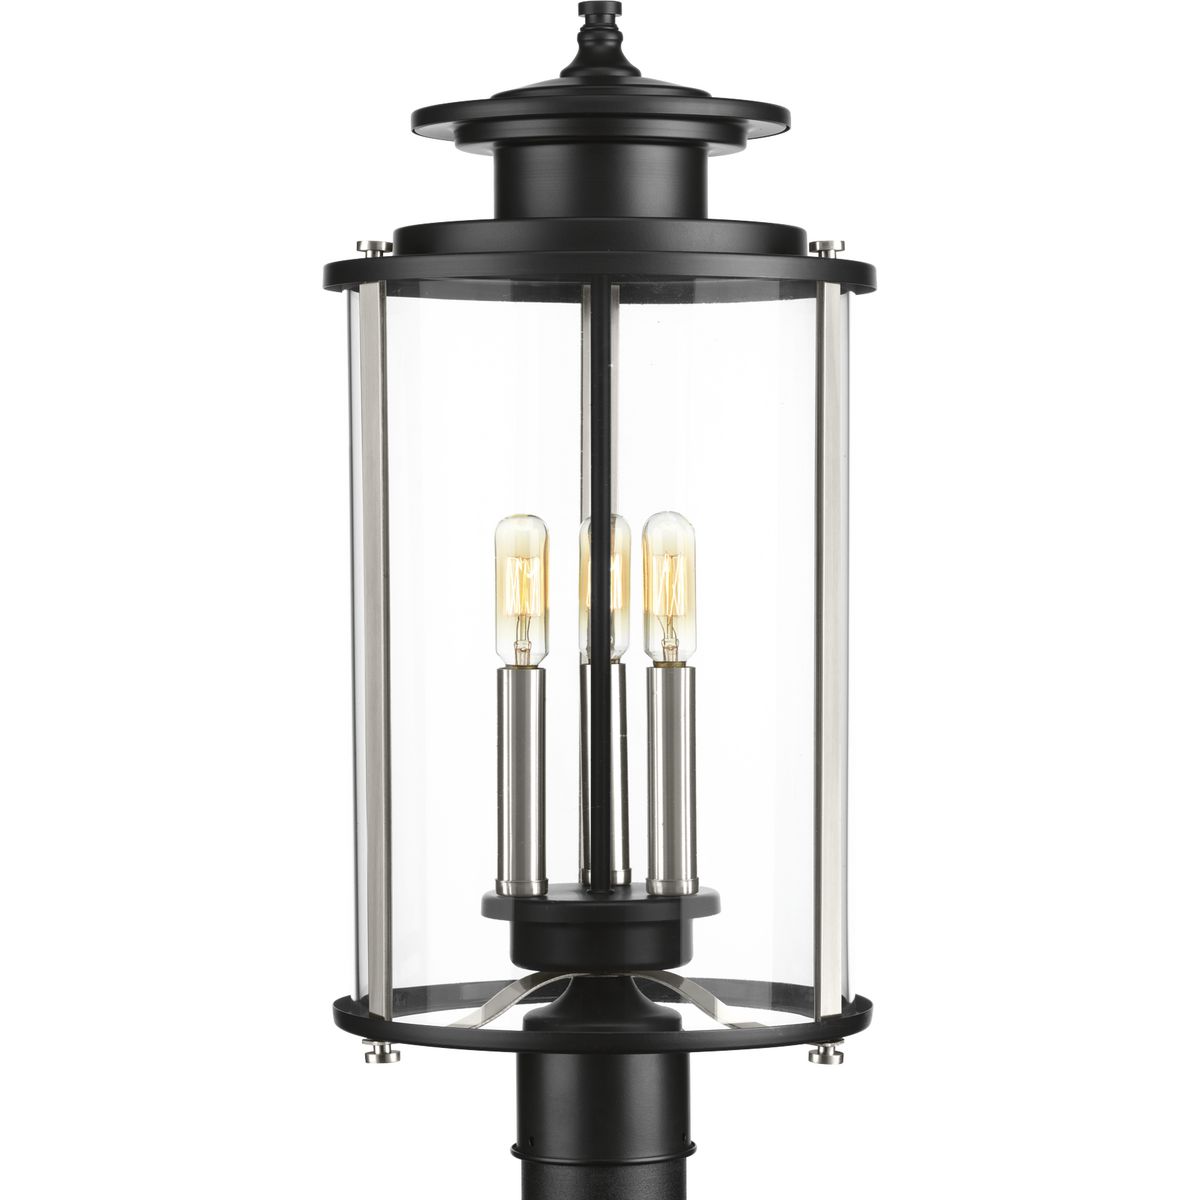 Squire three light post lantern features a classic traditional profile with clean, modern metal fittings. The Black finish is accented with contrasting Stainless Steel metallic elements, the cylindrical frame is comprised of a clear glass diffuser.